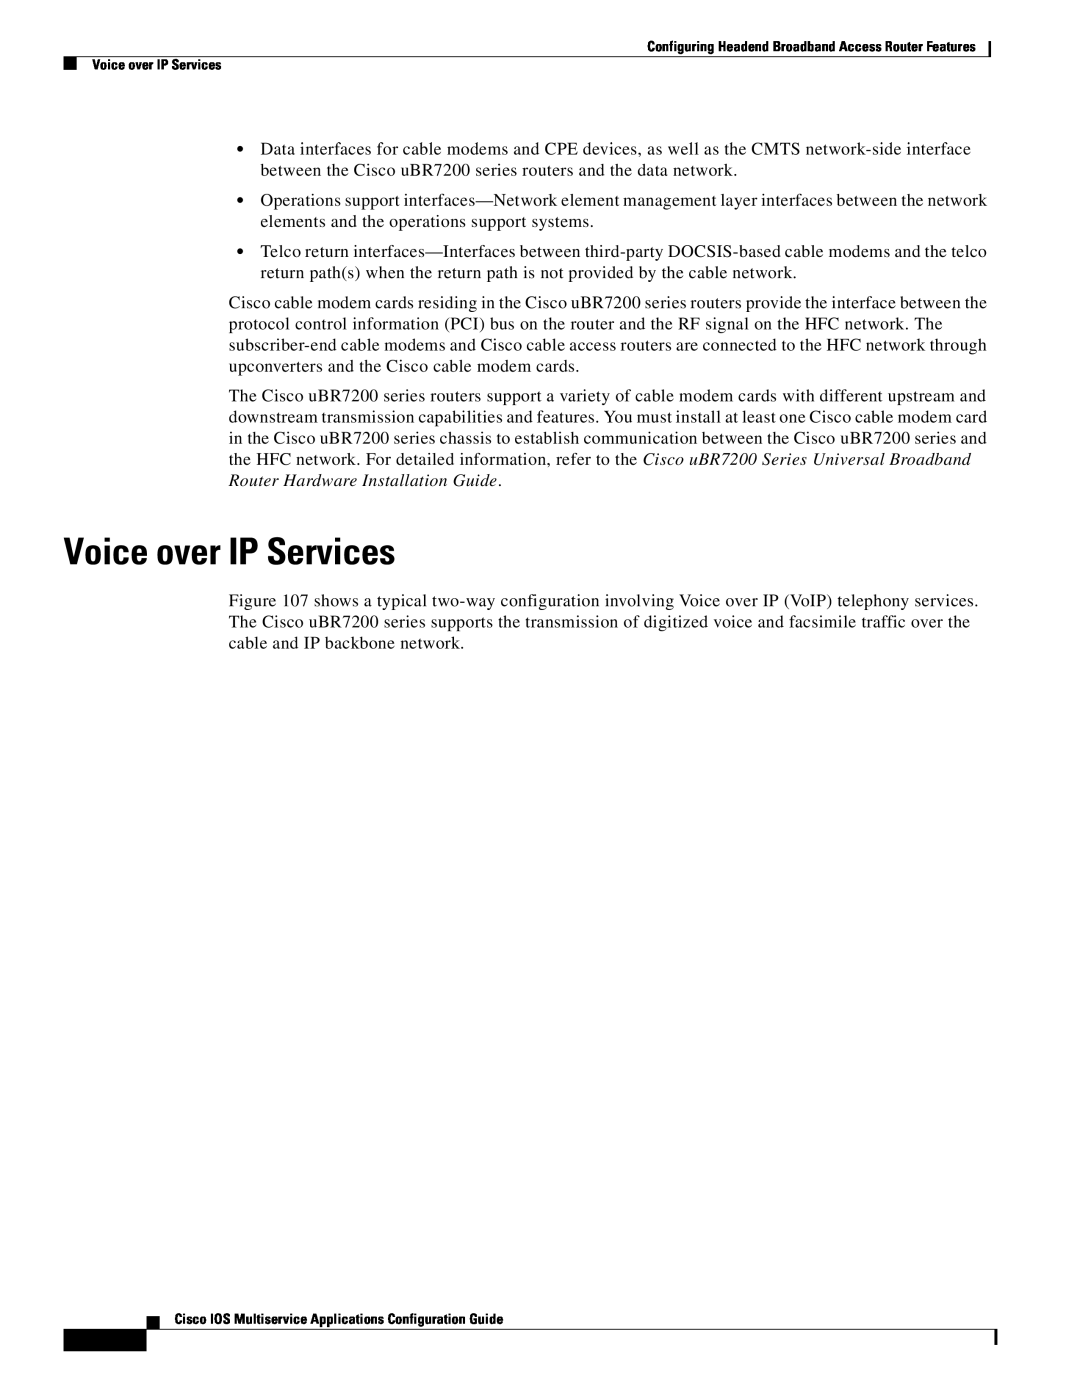 Cisco Systems uBR7200 manual Voice over IP Services 